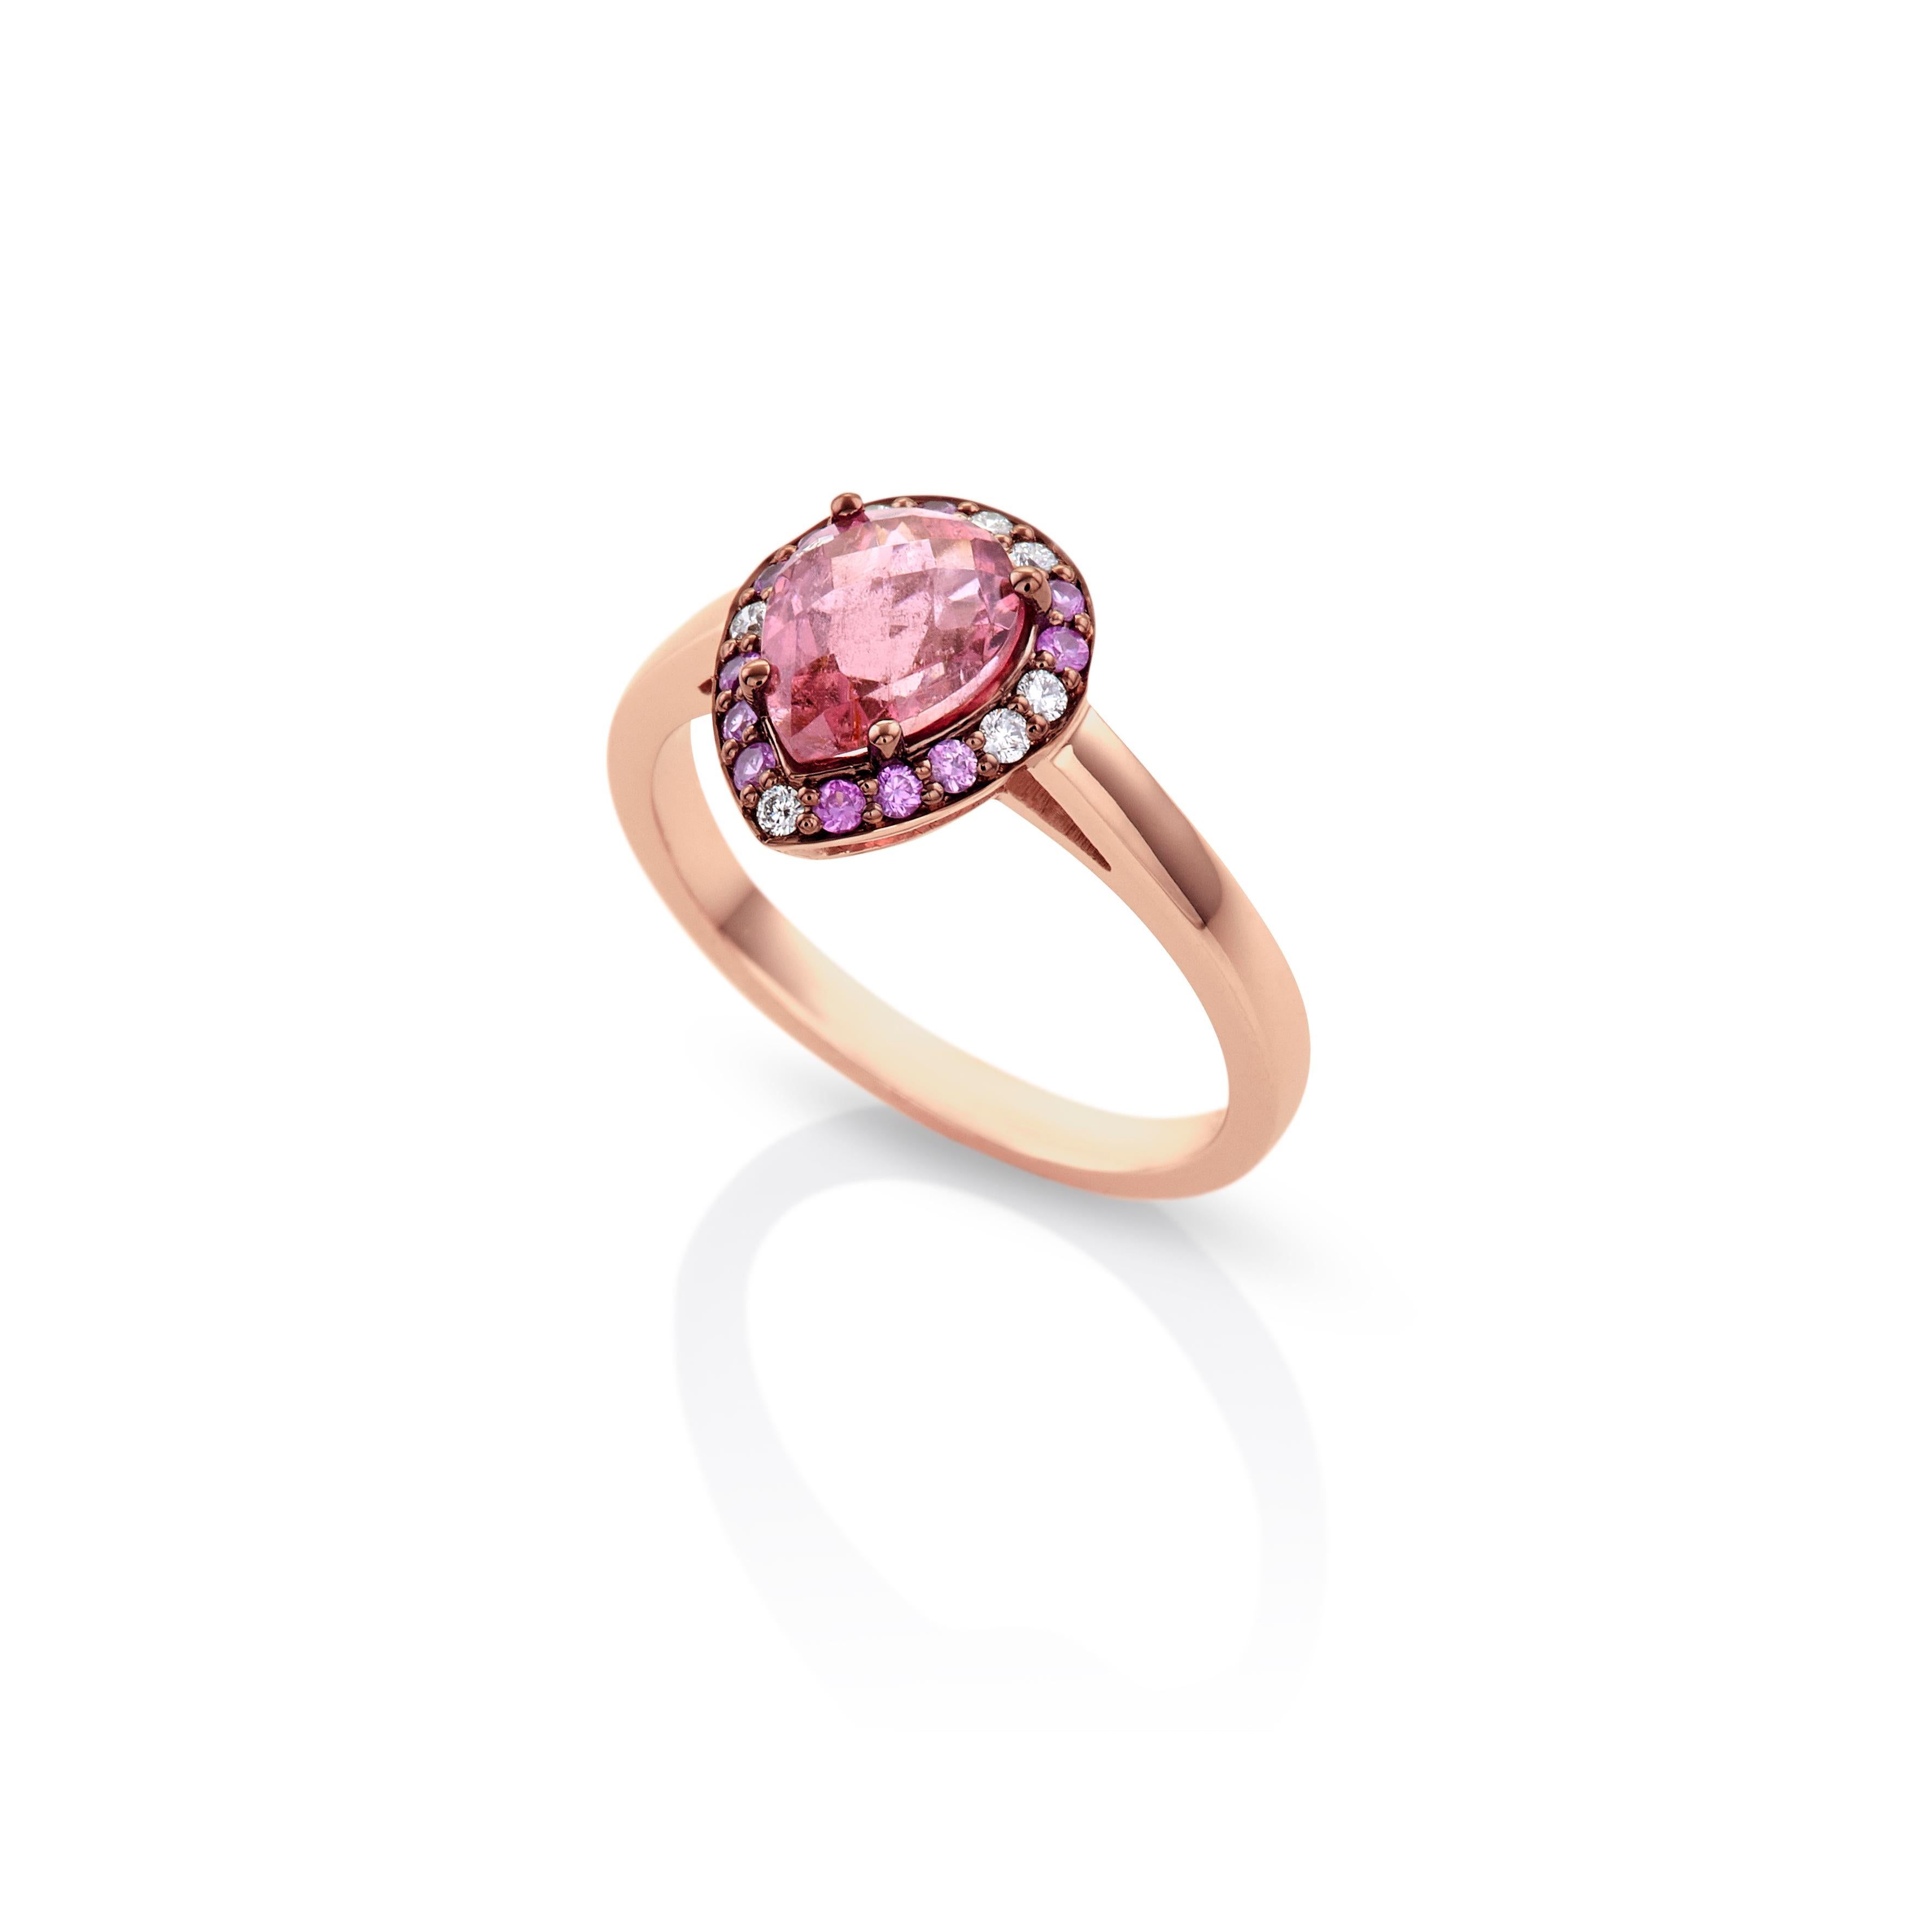 For Sale:  Colorful Drop Ring 18Kt White Gold with Red Tourmaline Pink Saphires and Diamond 9